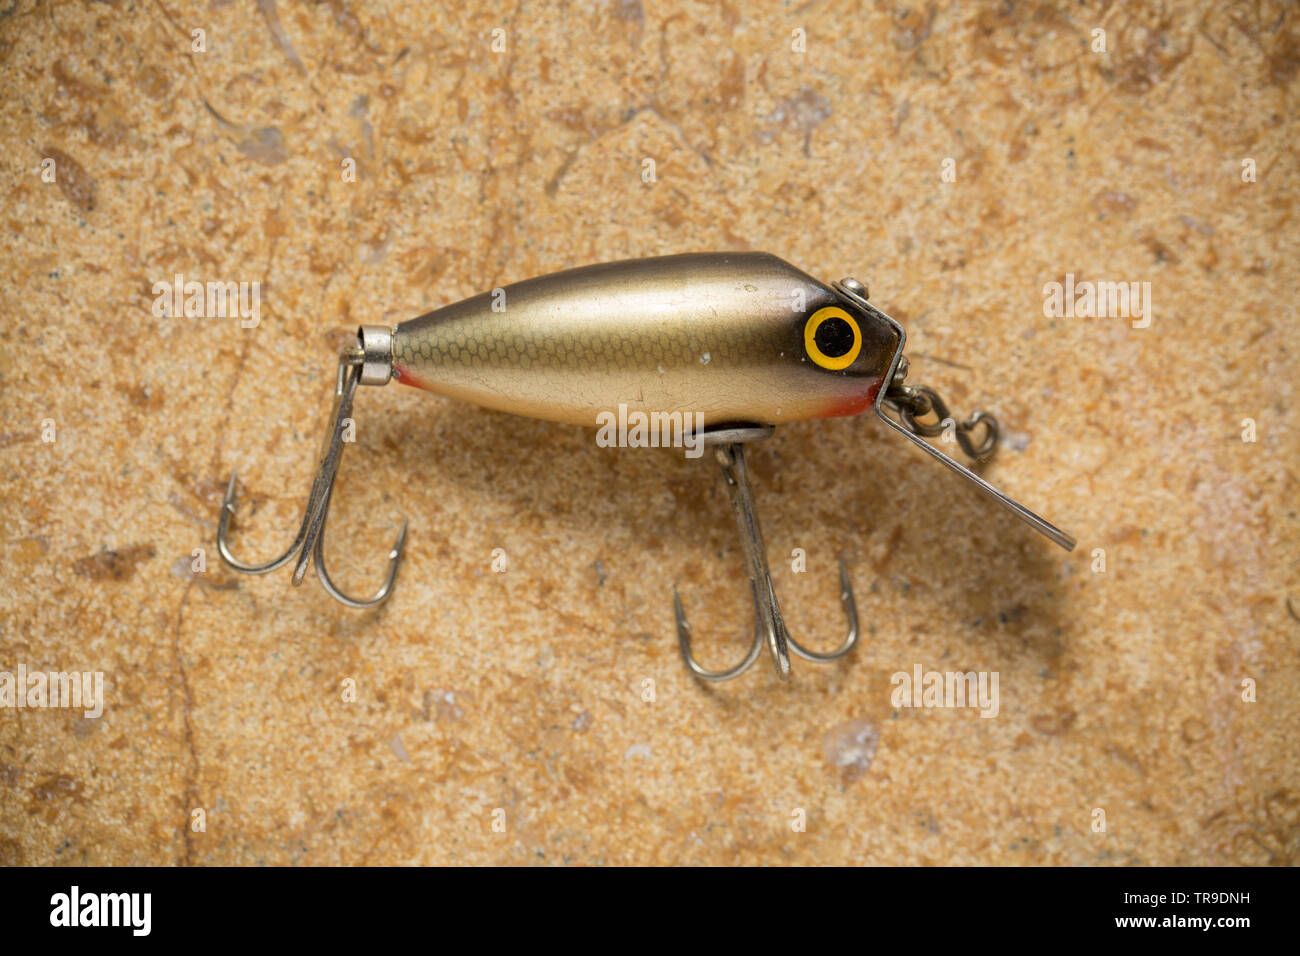 A vintage fishing lure equipped with treble hooks photographed on